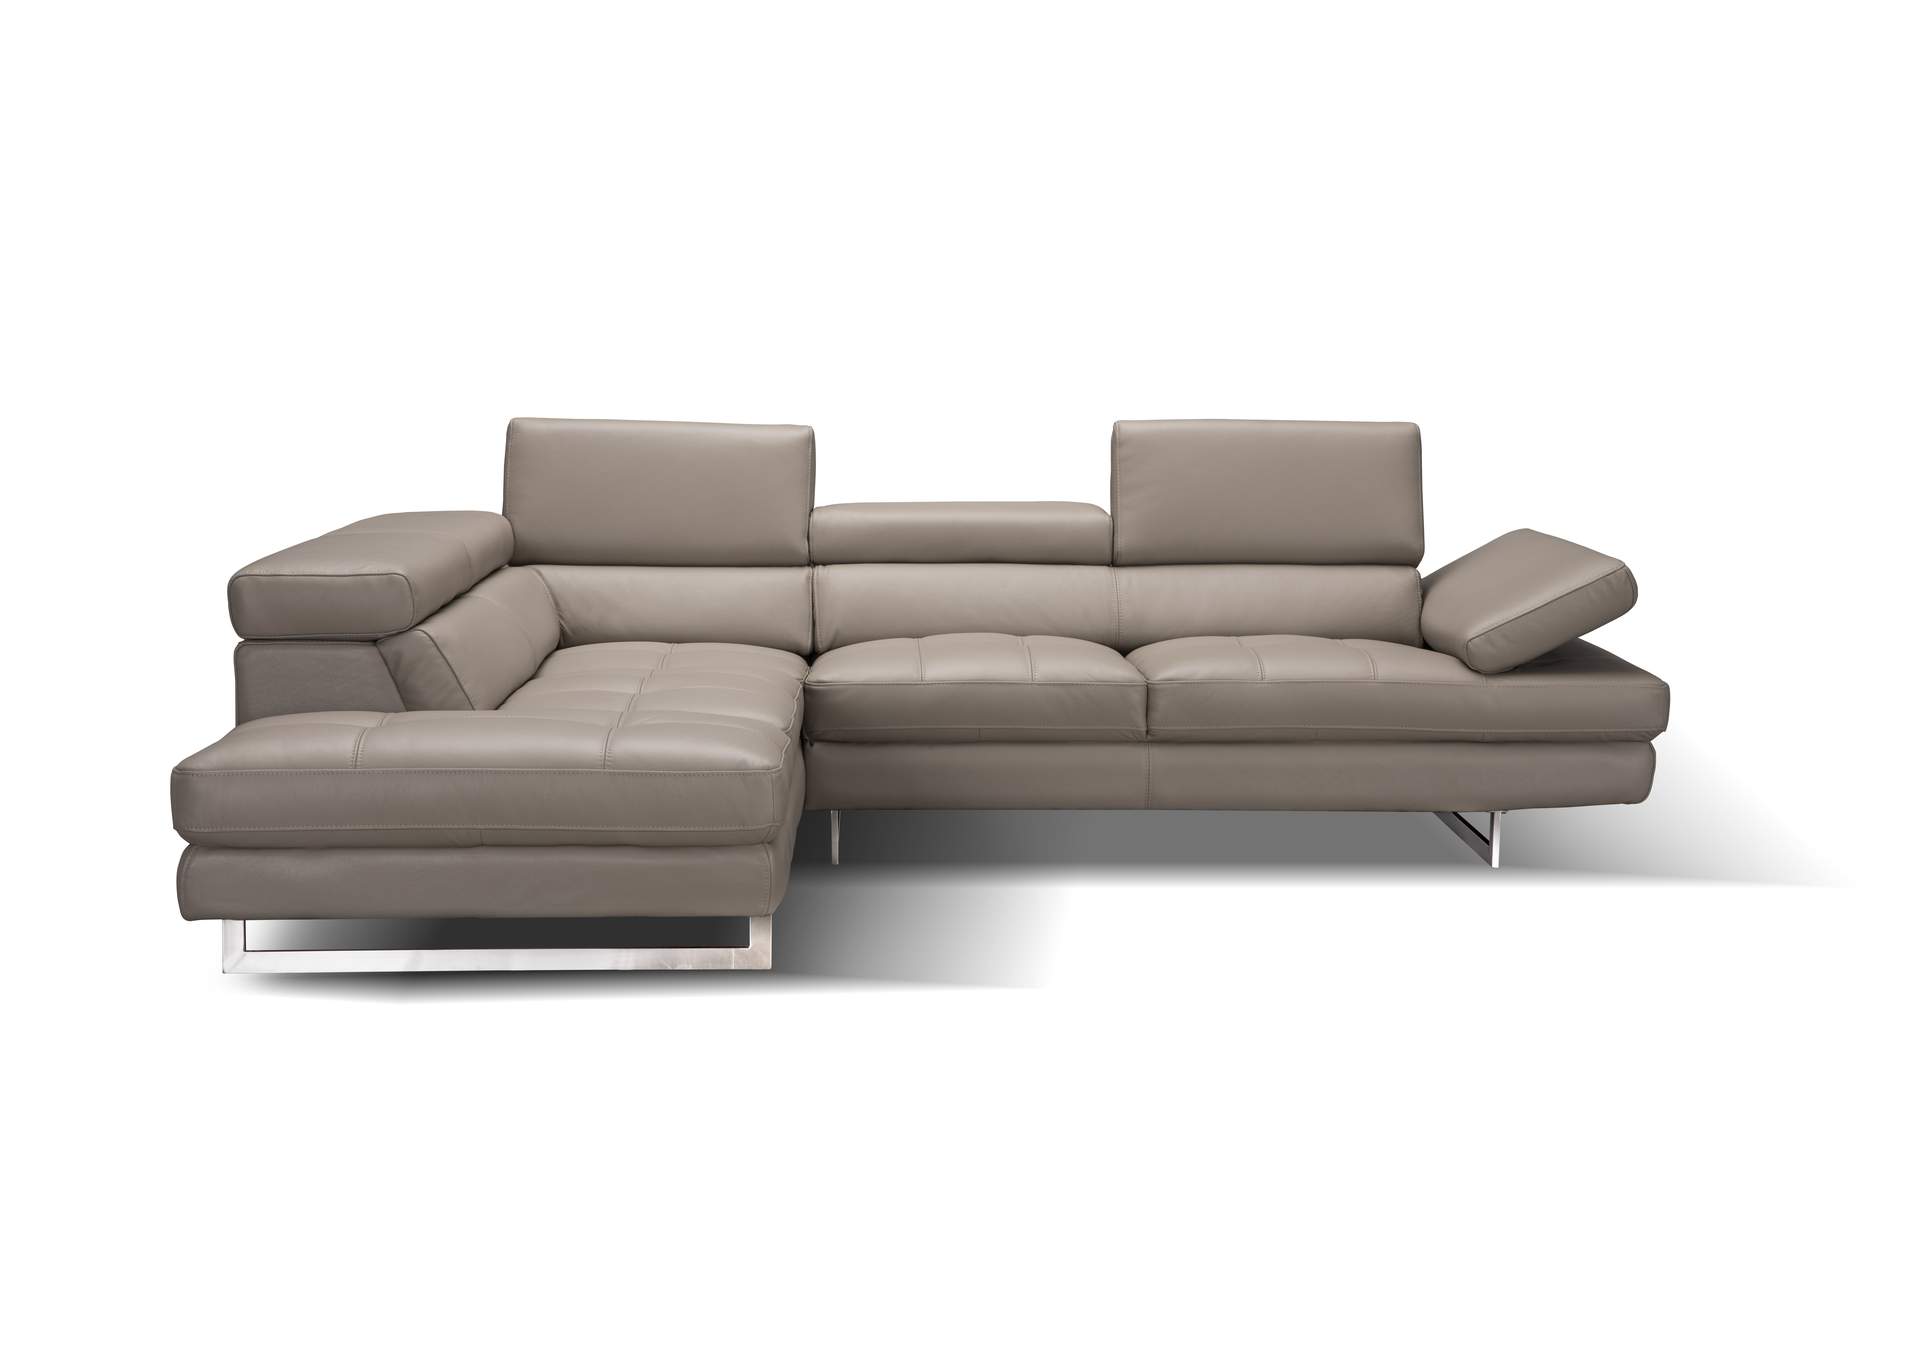 A761 Italian Leather Sectional Peanut In Left Hand Facing,J&M Furniture